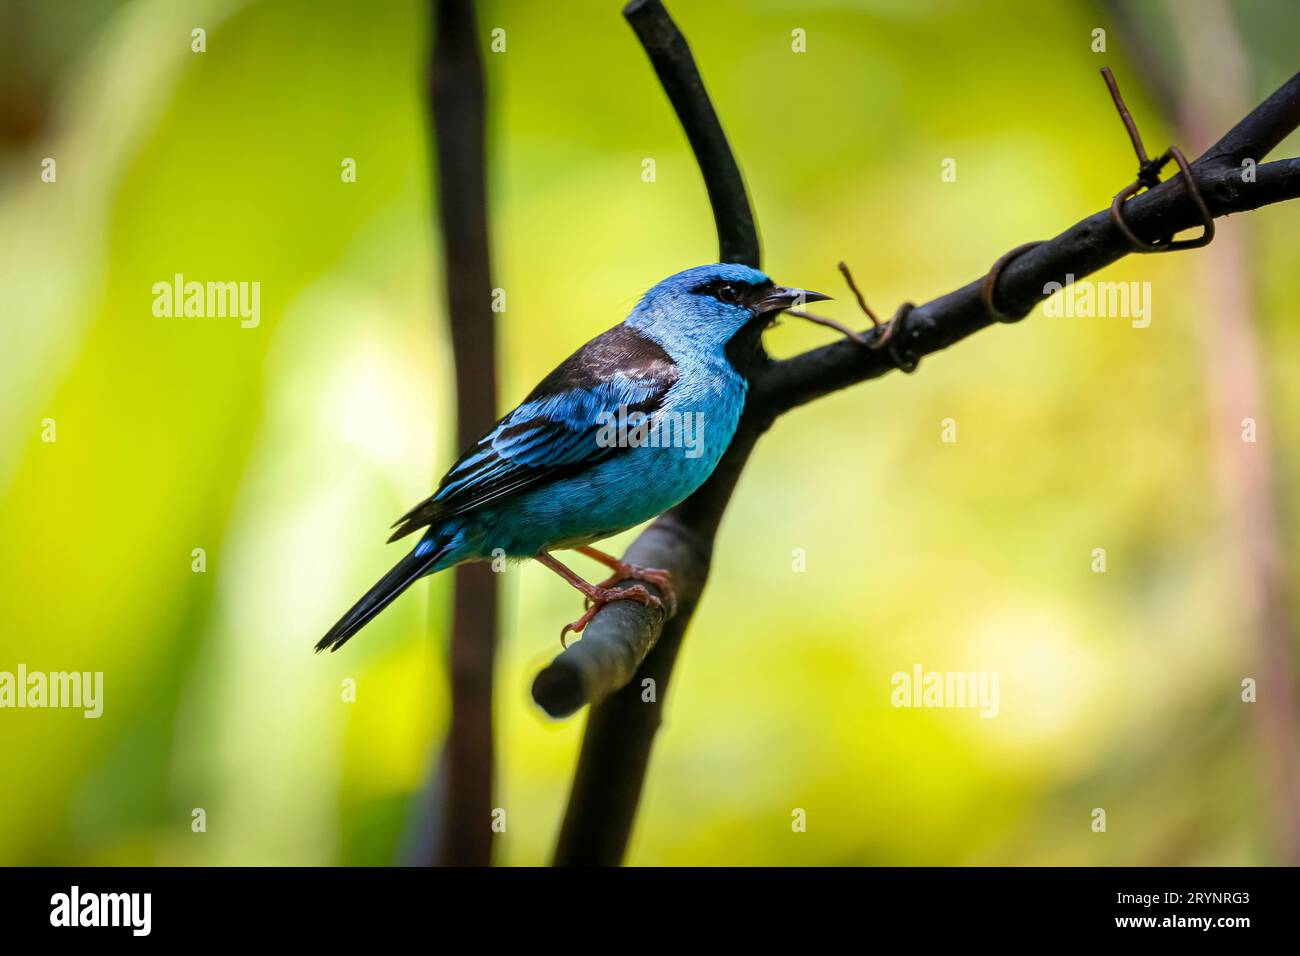 Blue Dacnis perched on a branch against defocused bright green background, Folha Seca, Brazil Stock Photo